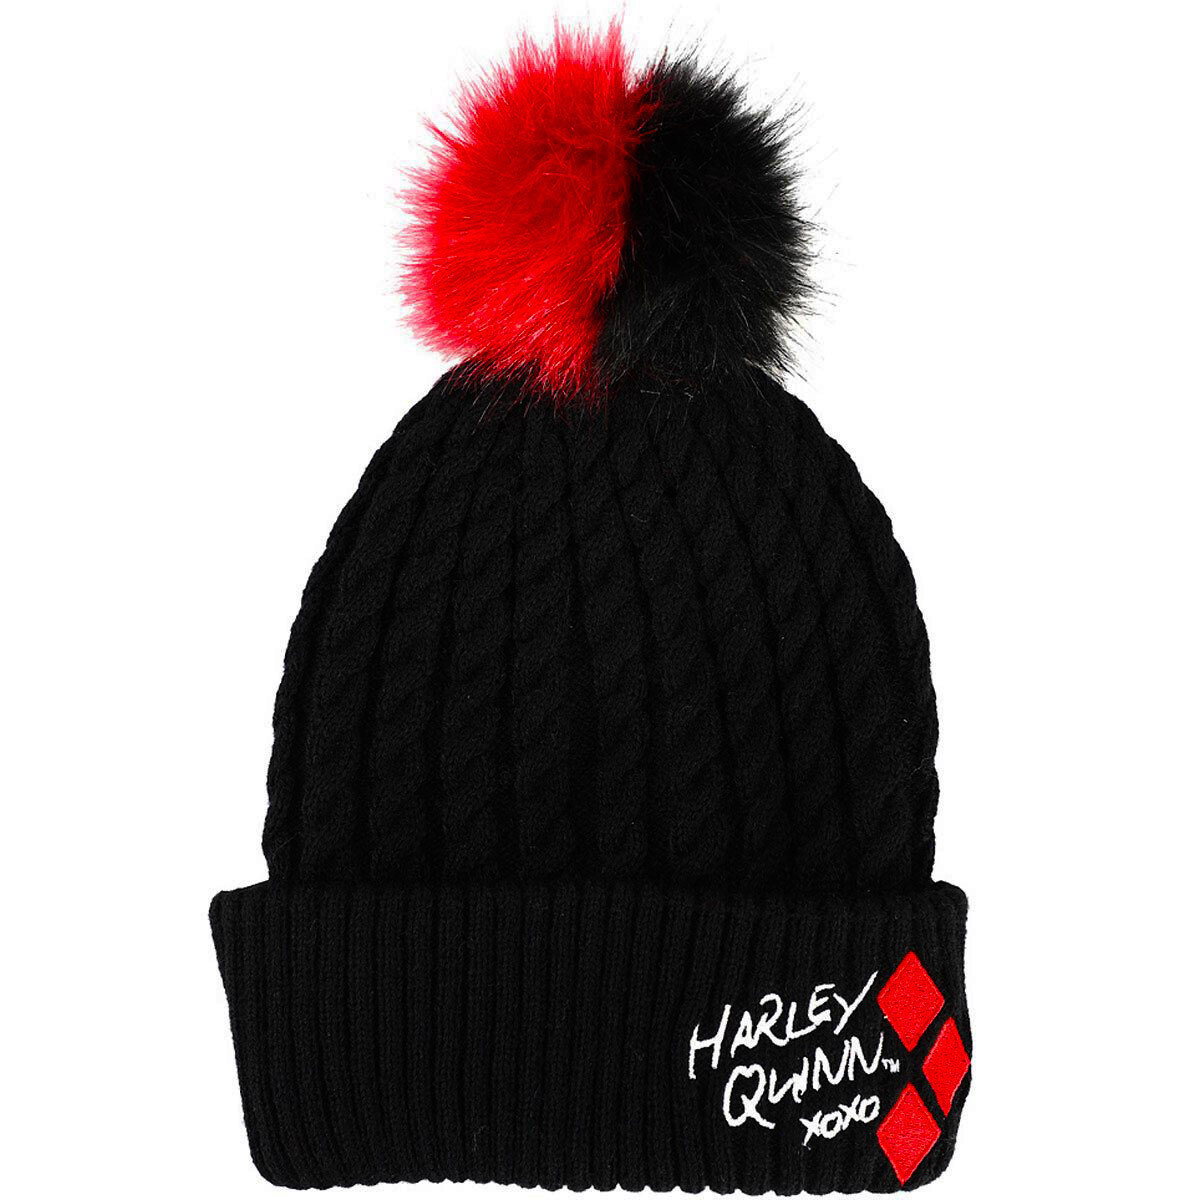 Harley Quinn Suicide Squad DC Comics Woven Knit Pom Beanie